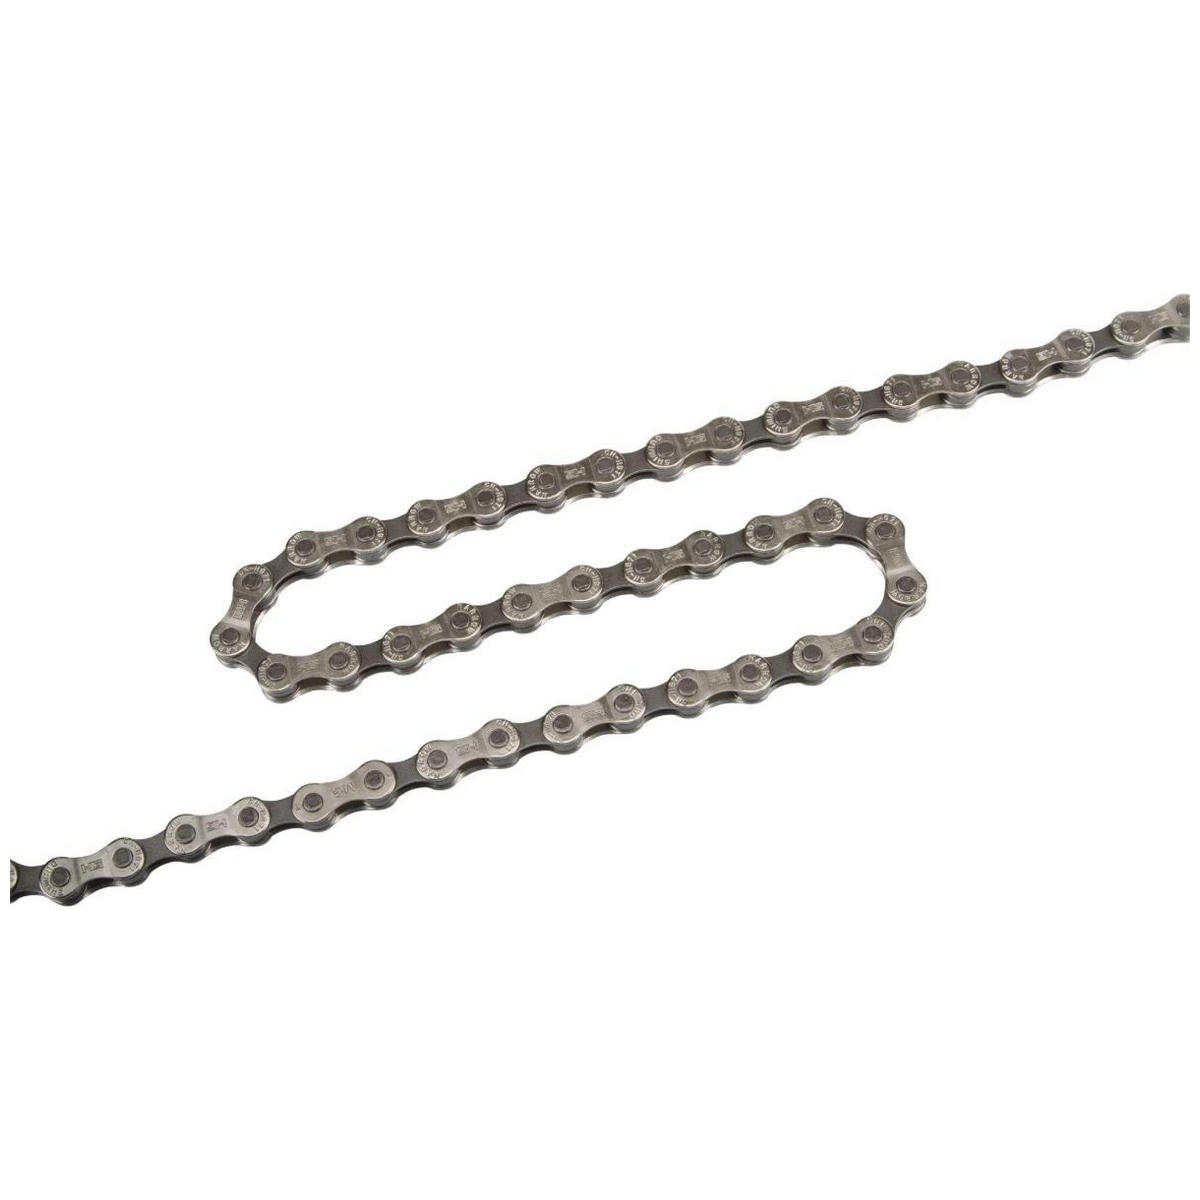 chain deore cn-hg71 7-8 speed 138 links